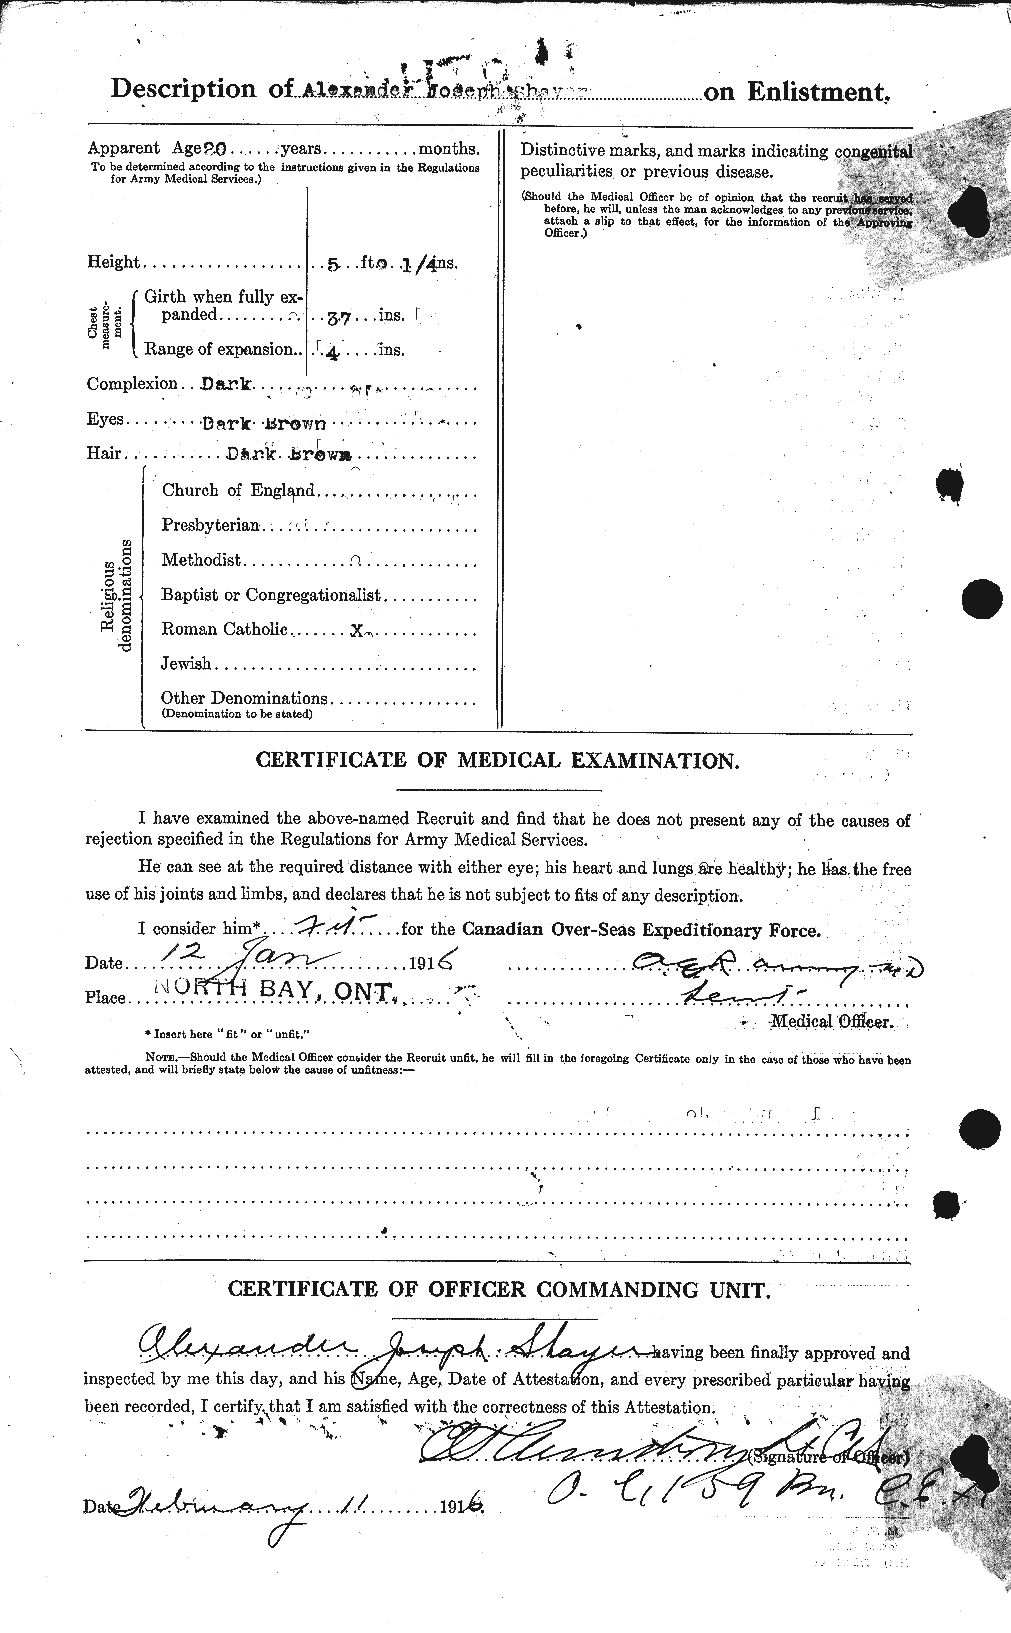 Personnel Records of the First World War - CEF 088918b